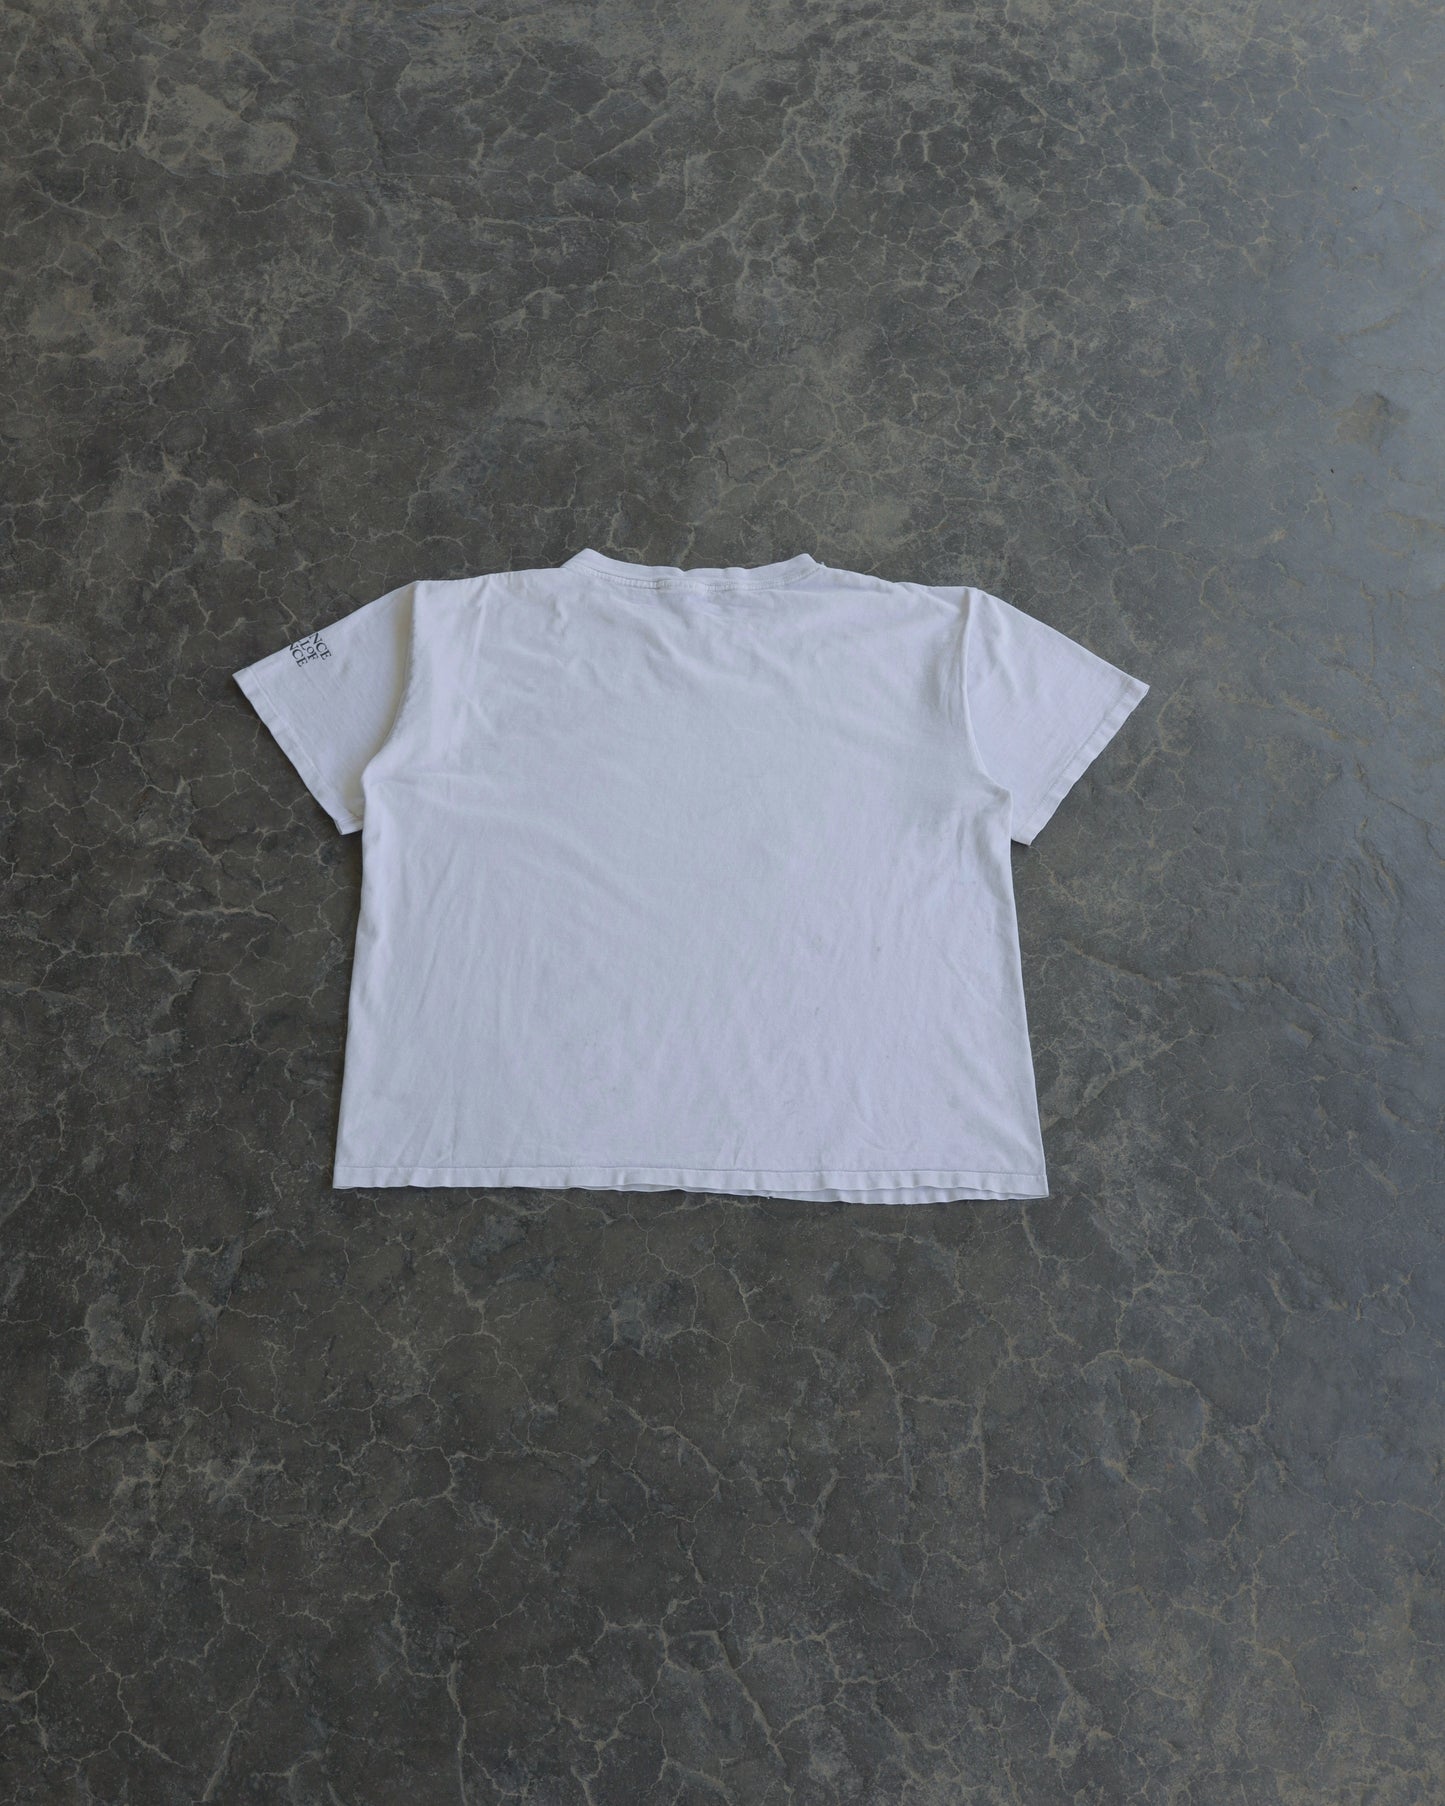 90s Wild Life Earth Day Boxy Fit White Tee - L